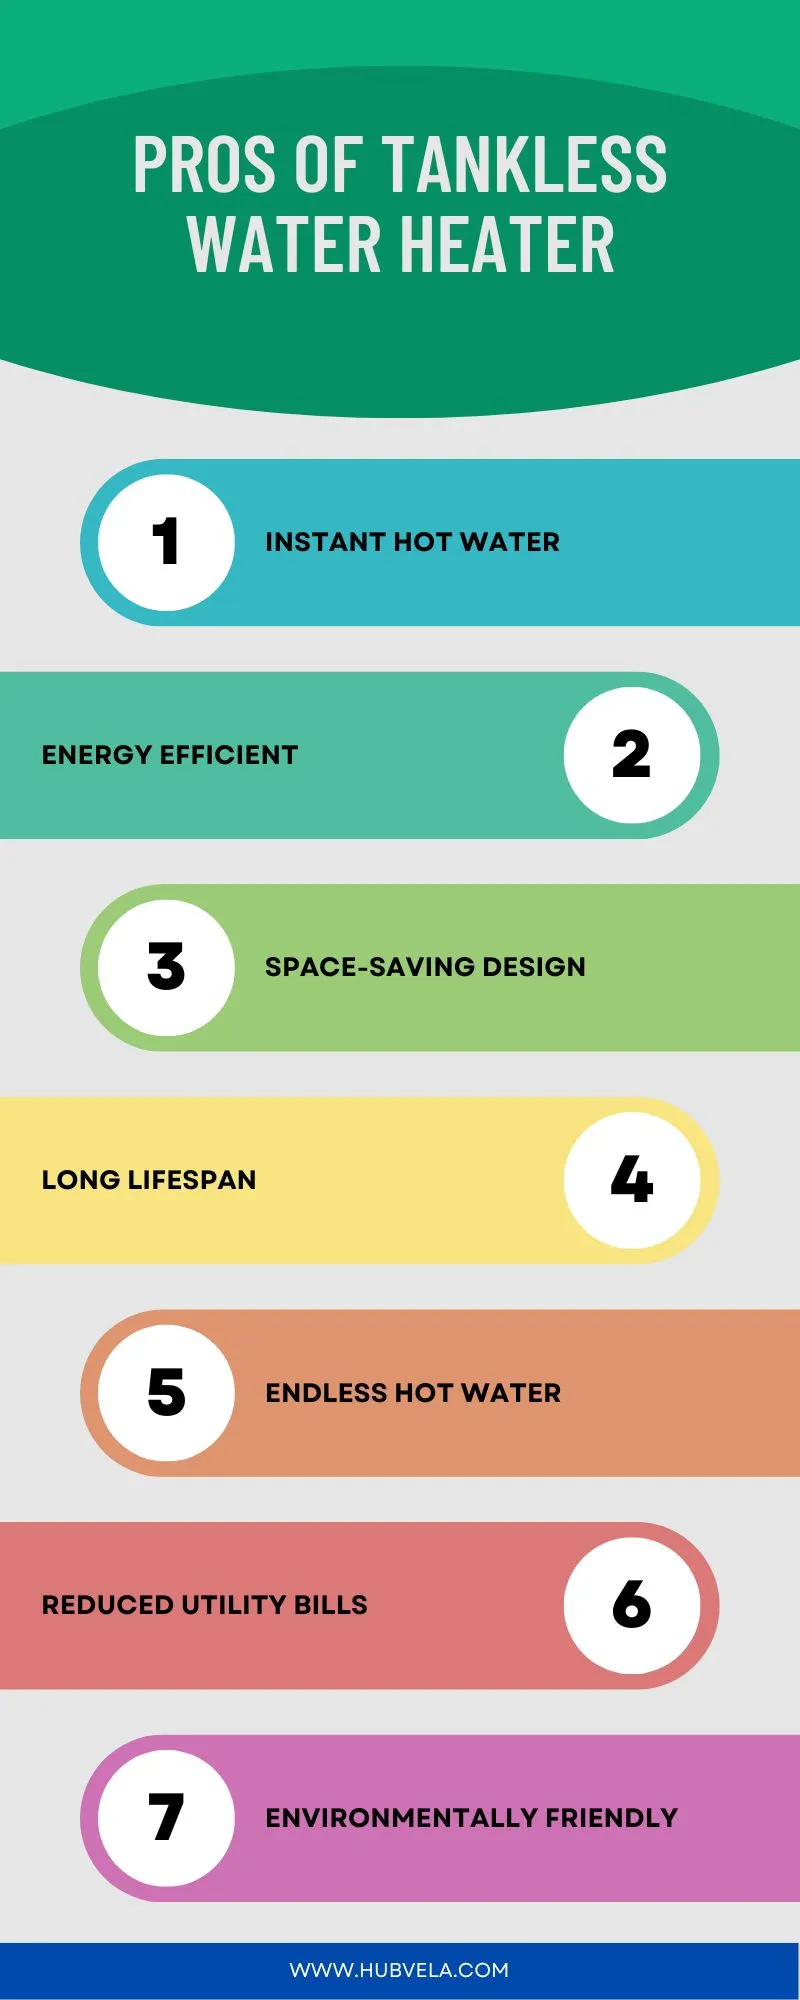 Pros of Tankless Water Heater Infographic